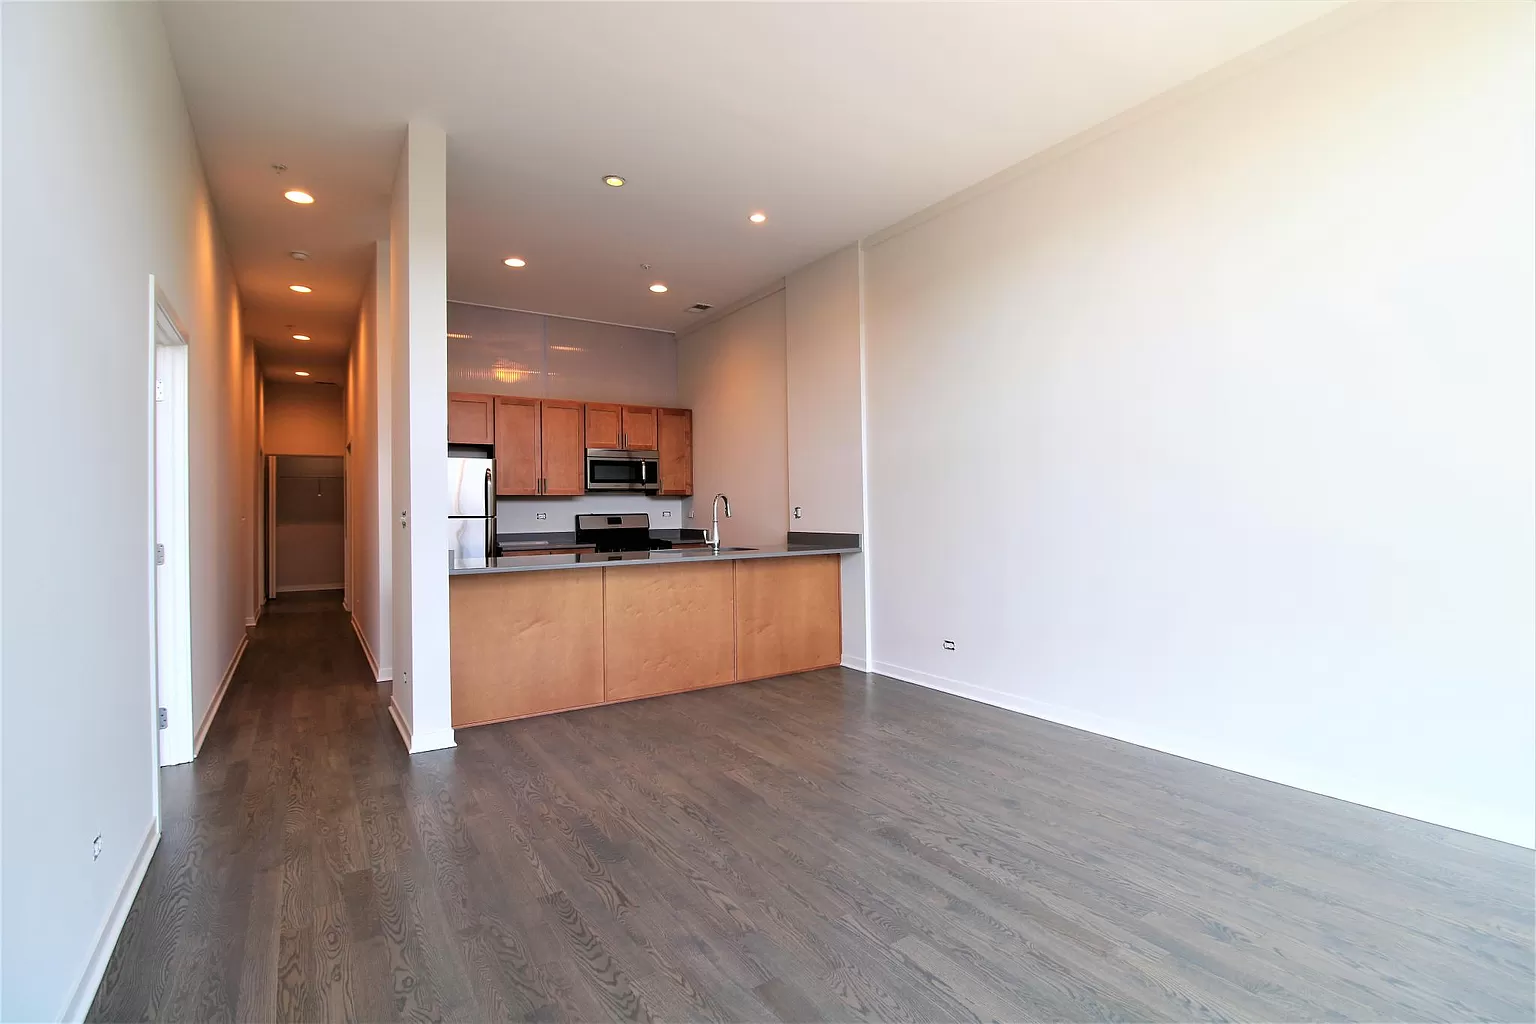 IADT - Chicago Housing 2.5 Bed 2 bath apartment - Available for lease takeover or looking for a room mate for International Academy of Design and Technology Students in Chicago, IL